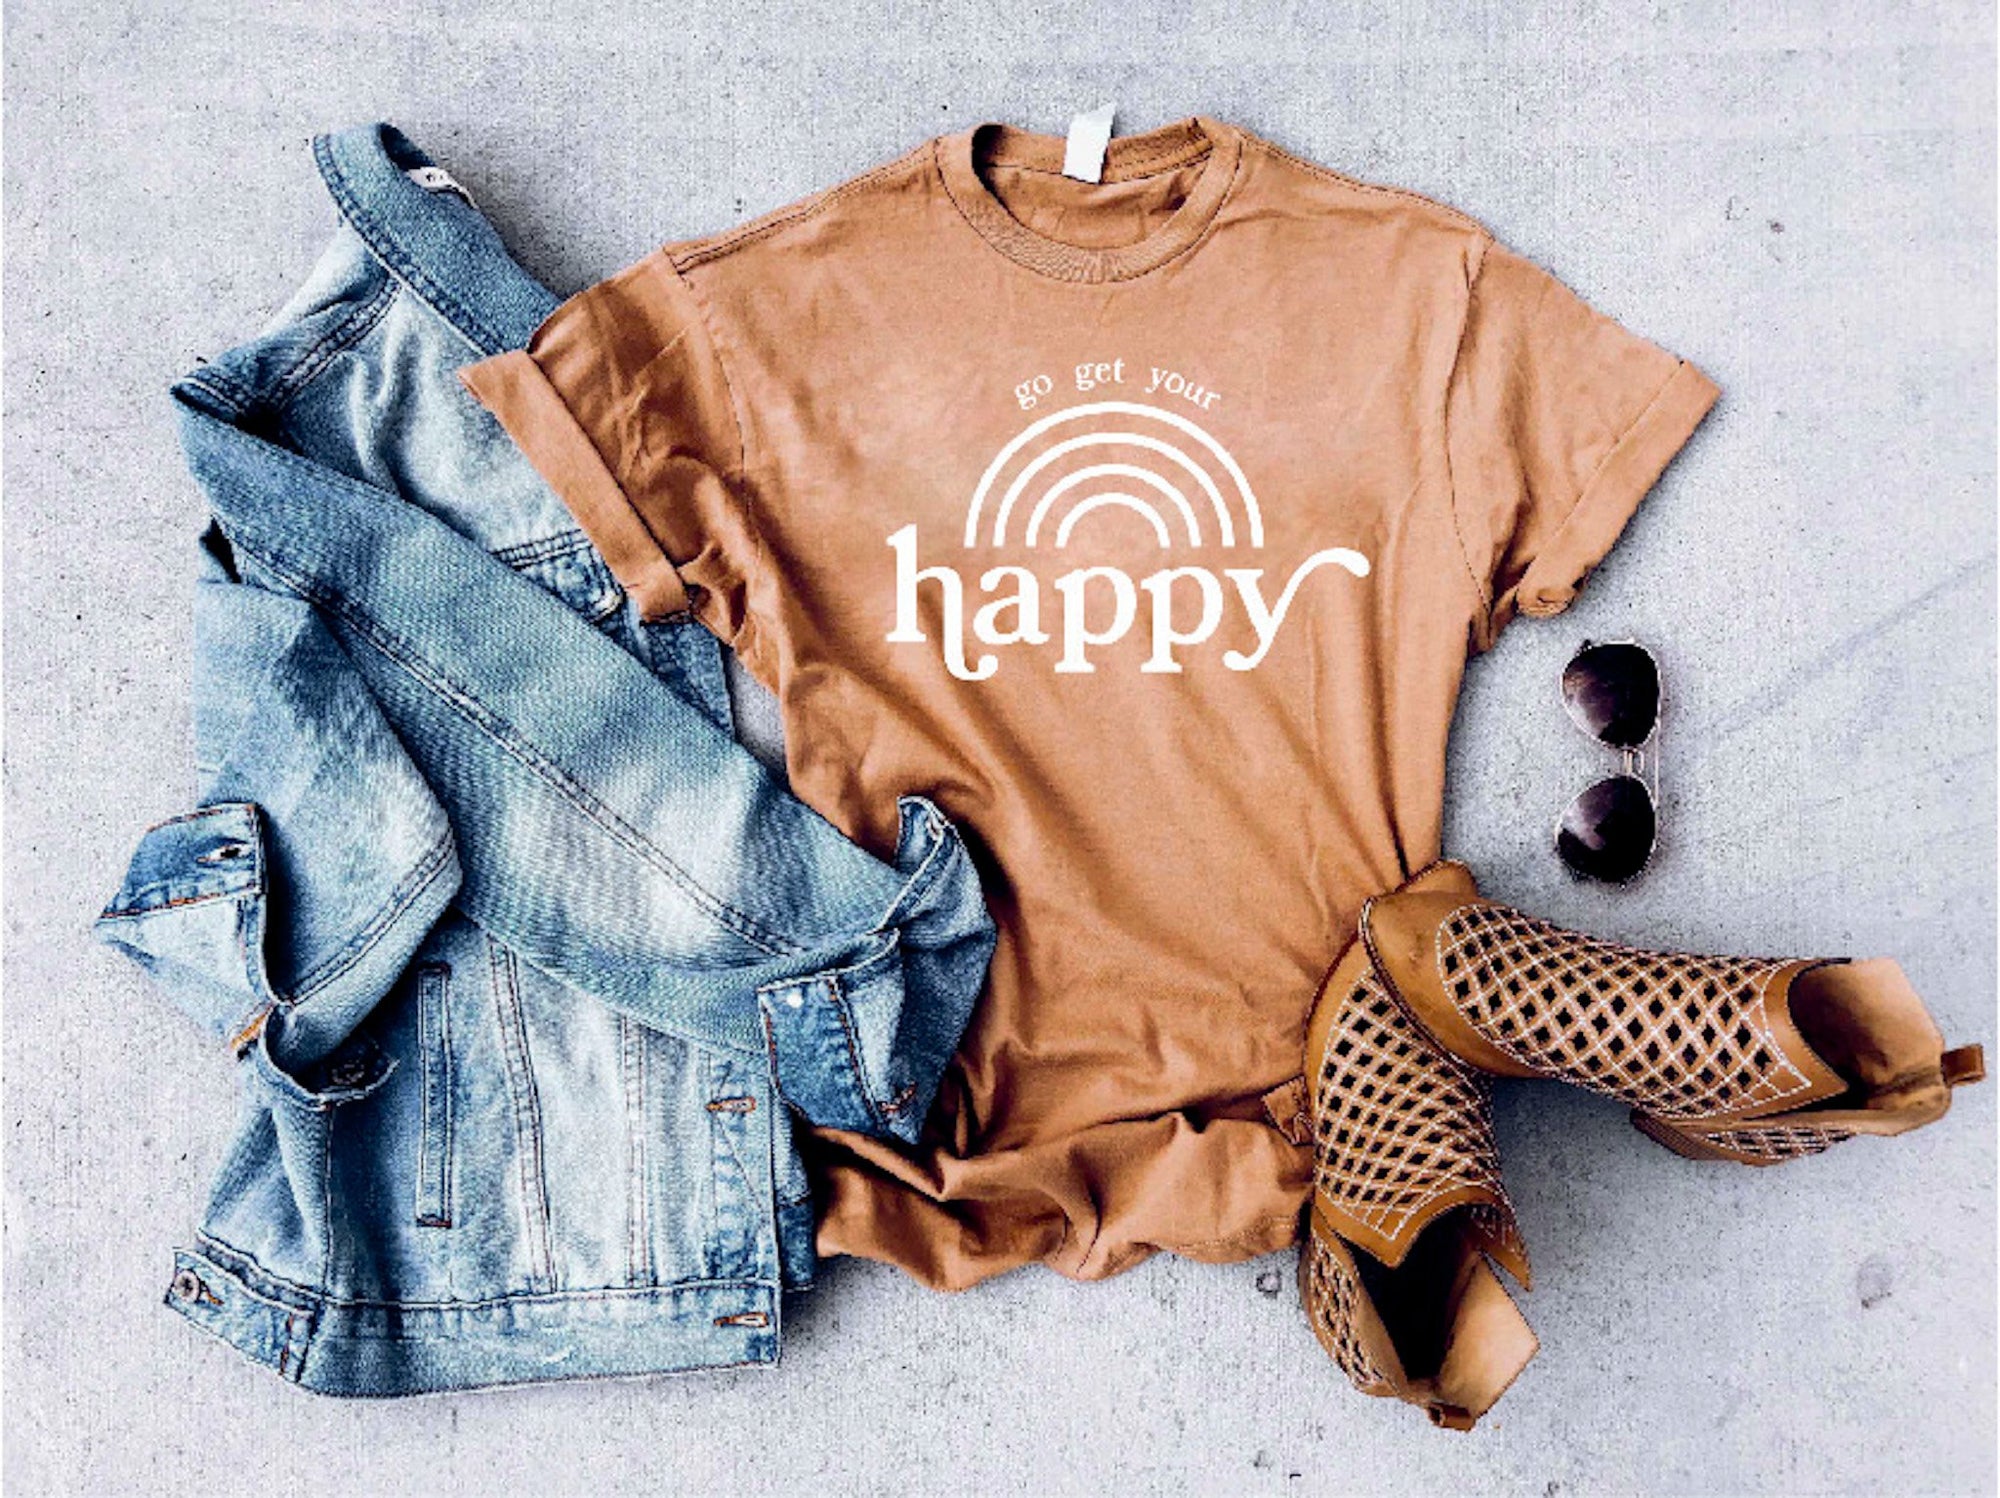 Go get your happy vintage wash tee Short sleeve miscellaneous tee Lane 7 15004 Camel 